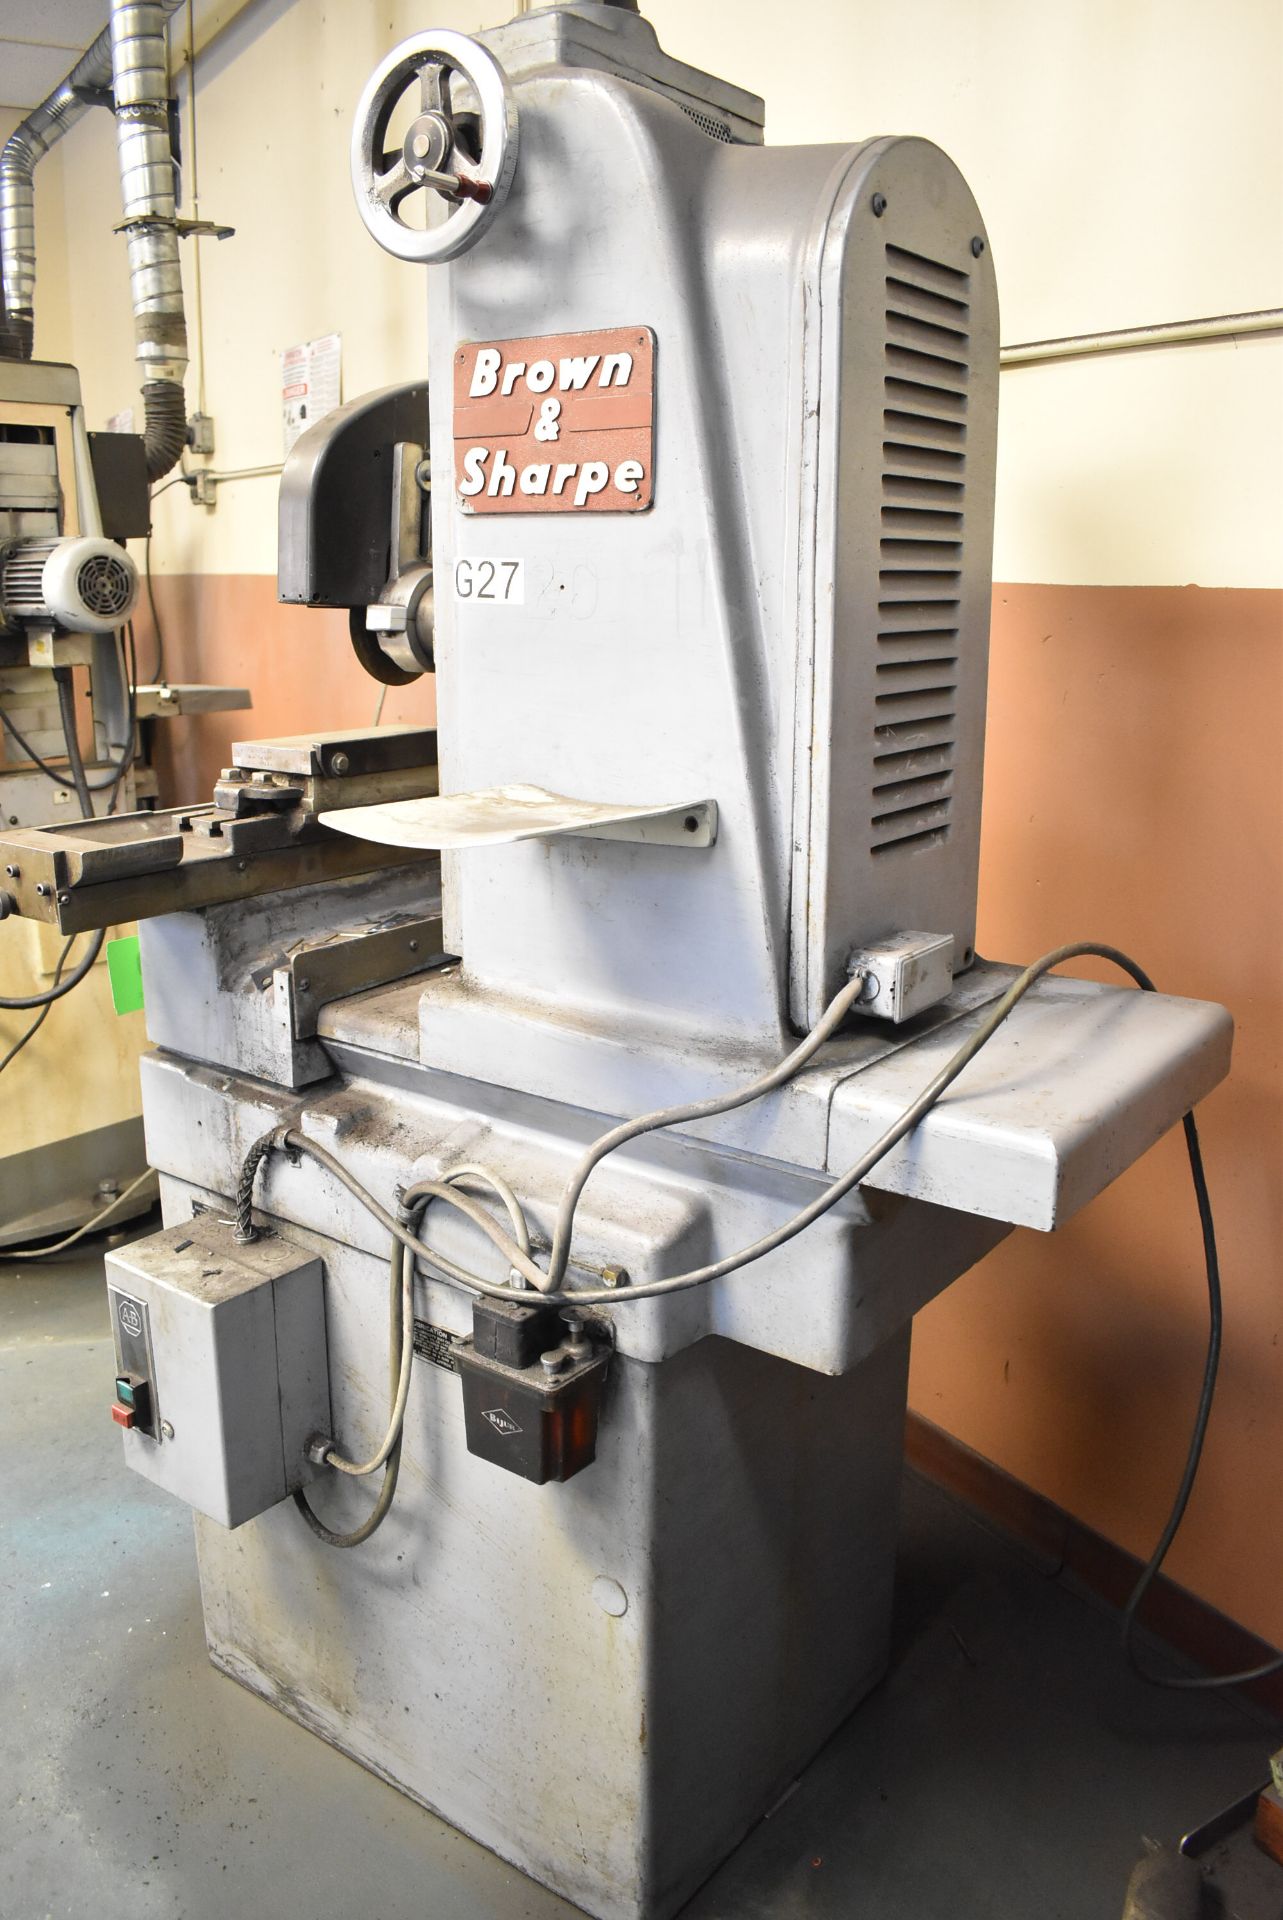 BROWN & SHARPE 510 CONVENTIONAL SURFACE GRINDER WITH 5"X10" MAGNETIC CHUCK, 8" WHEEL, S/N: 523-510- - Image 5 of 6